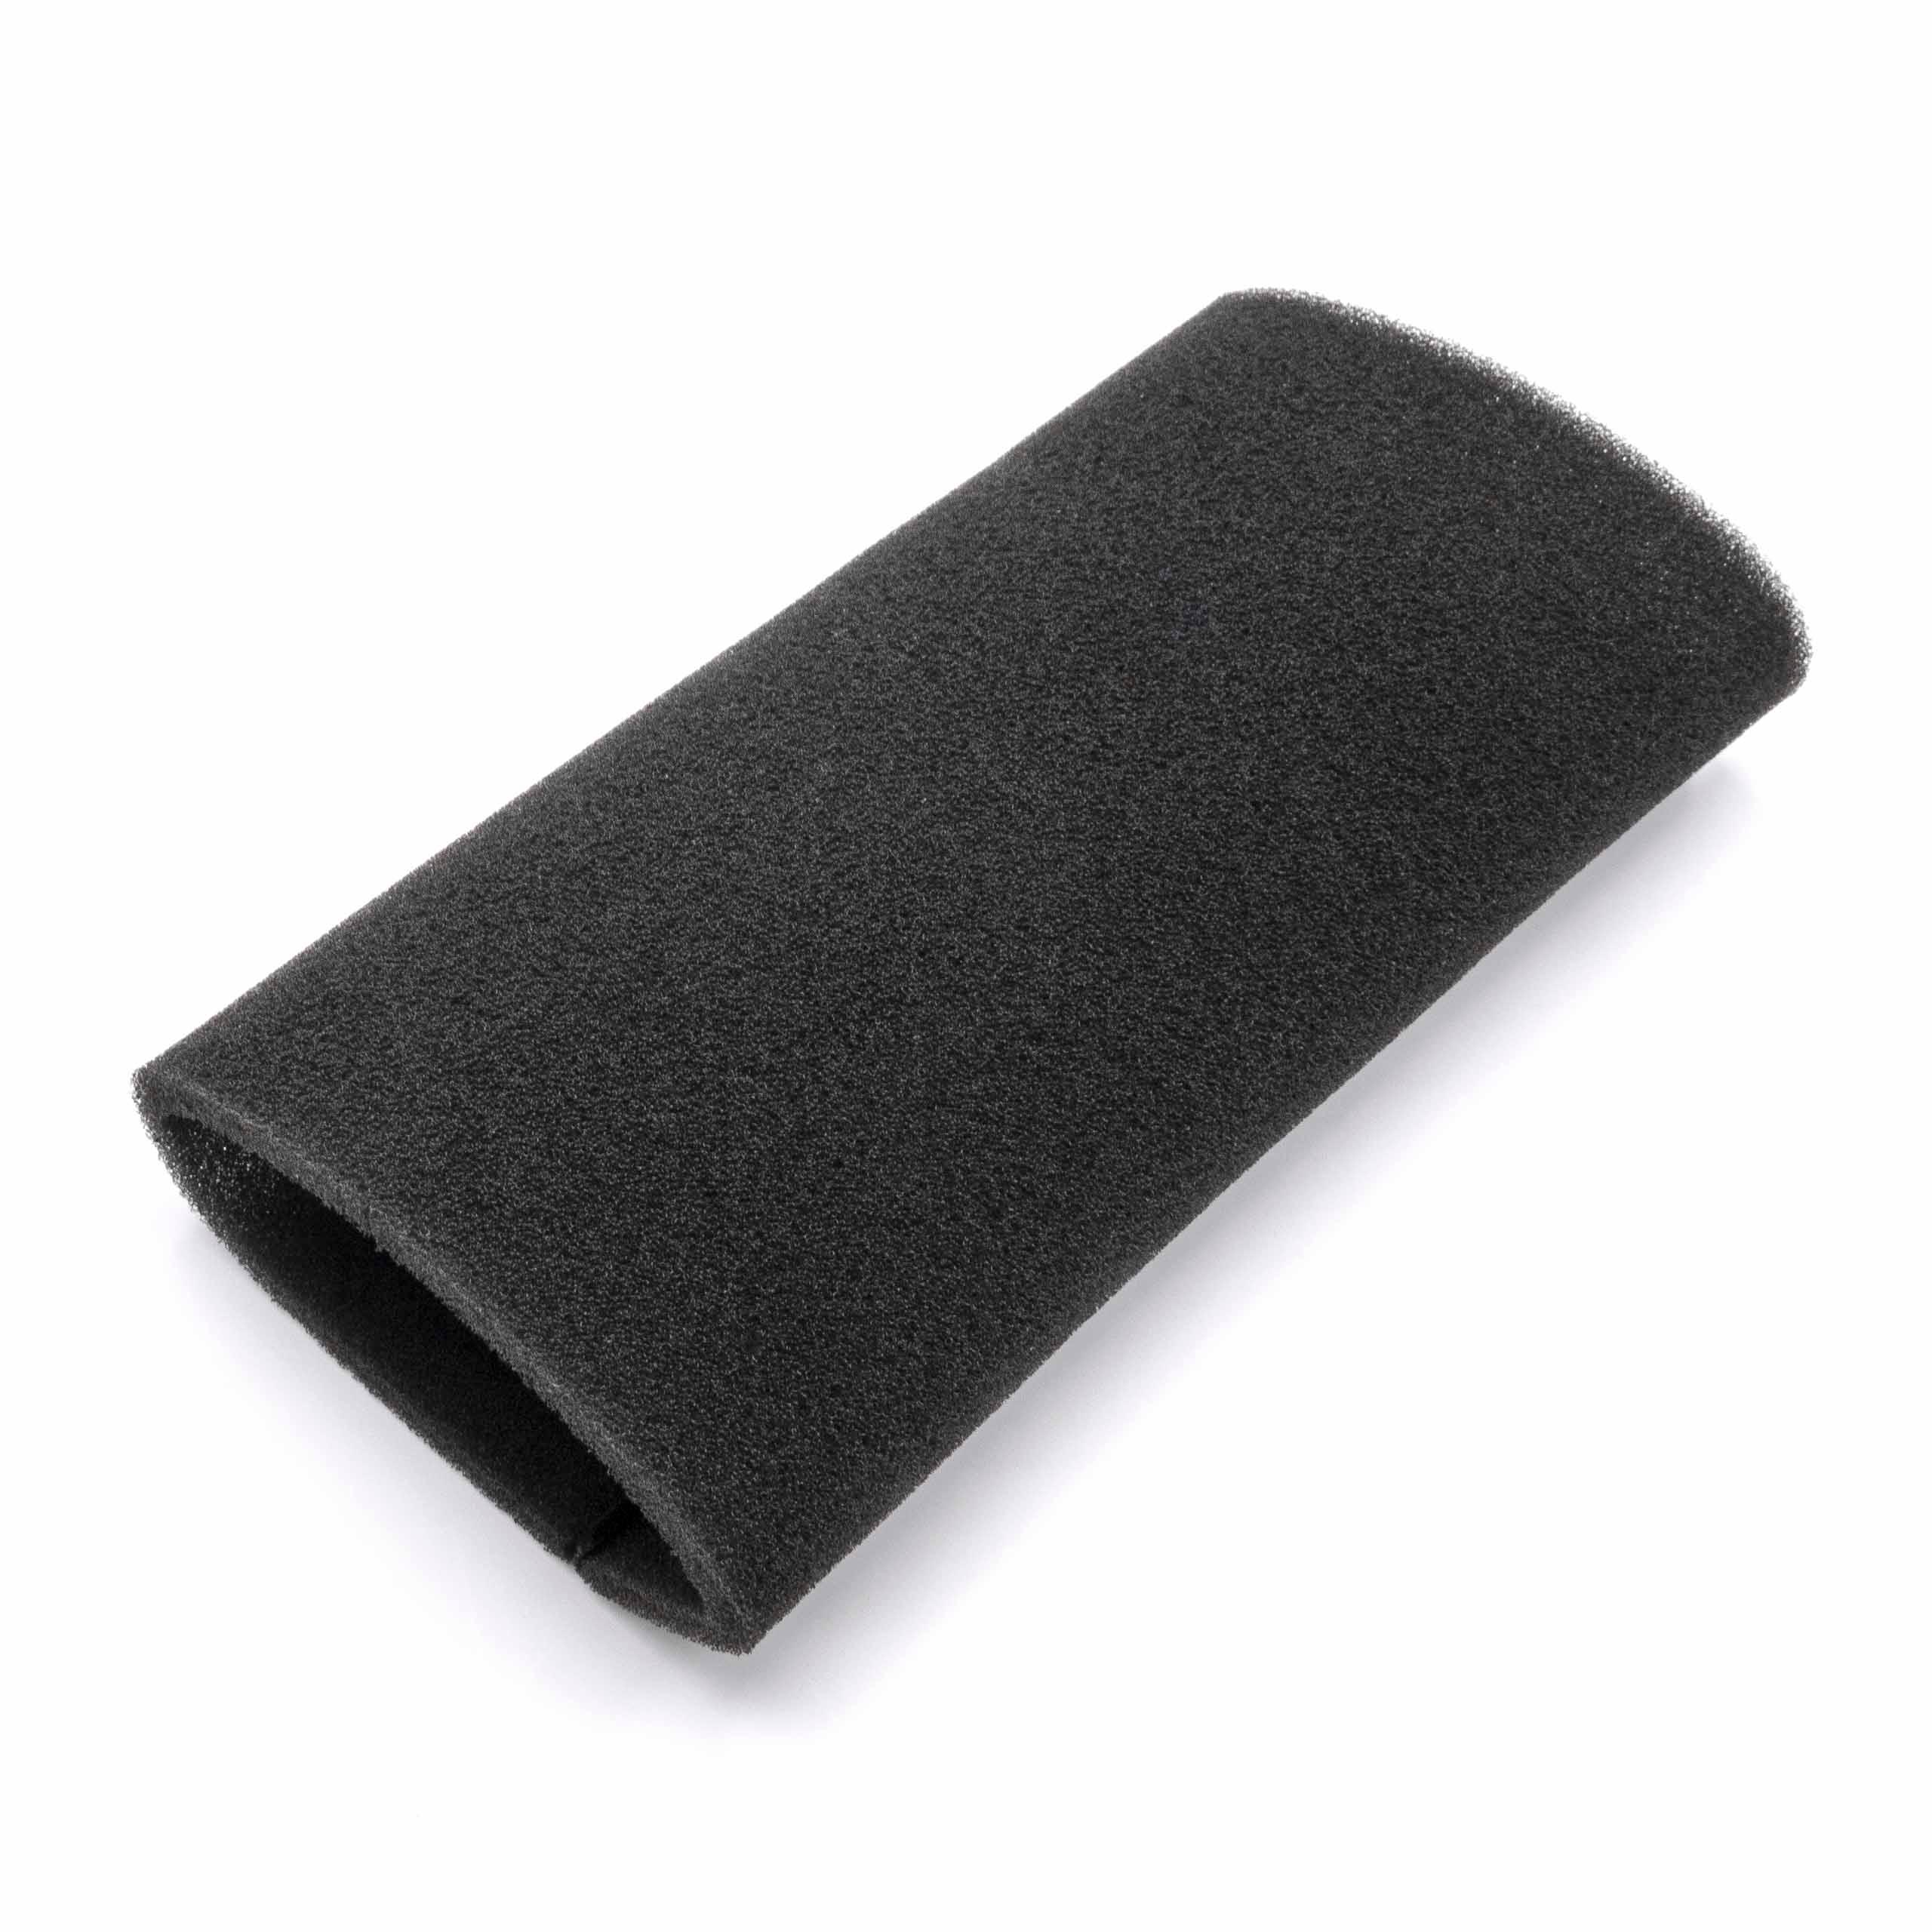 1x foam filter replaces Bosch 00754175 for Bosch Vacuum Cleaner